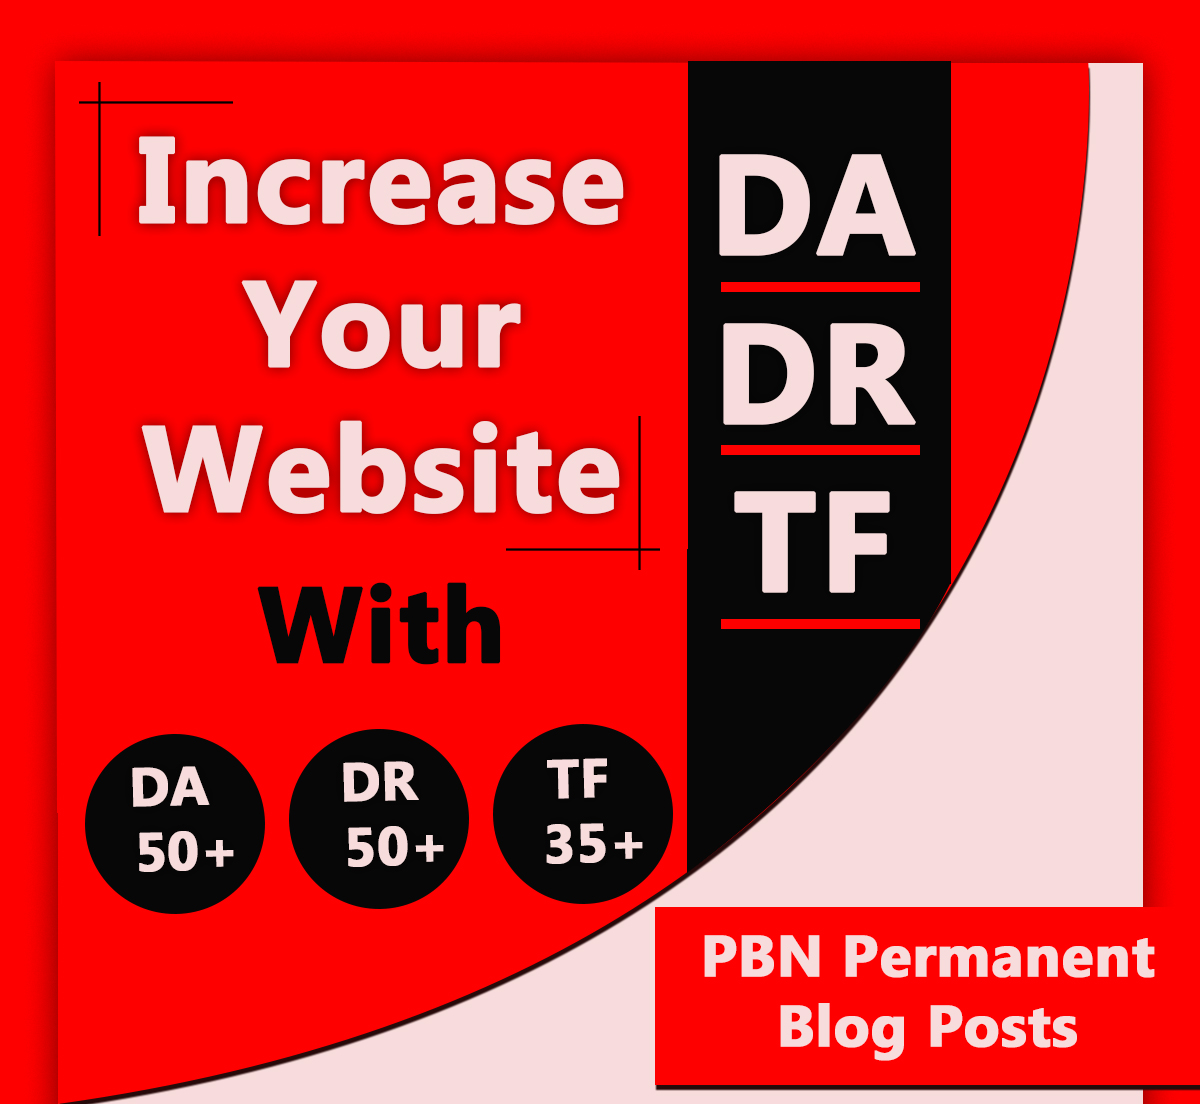 Increase Your Website DA DR TF With 15 DA 50+ DR 50+ TF 35+ PBN Posts